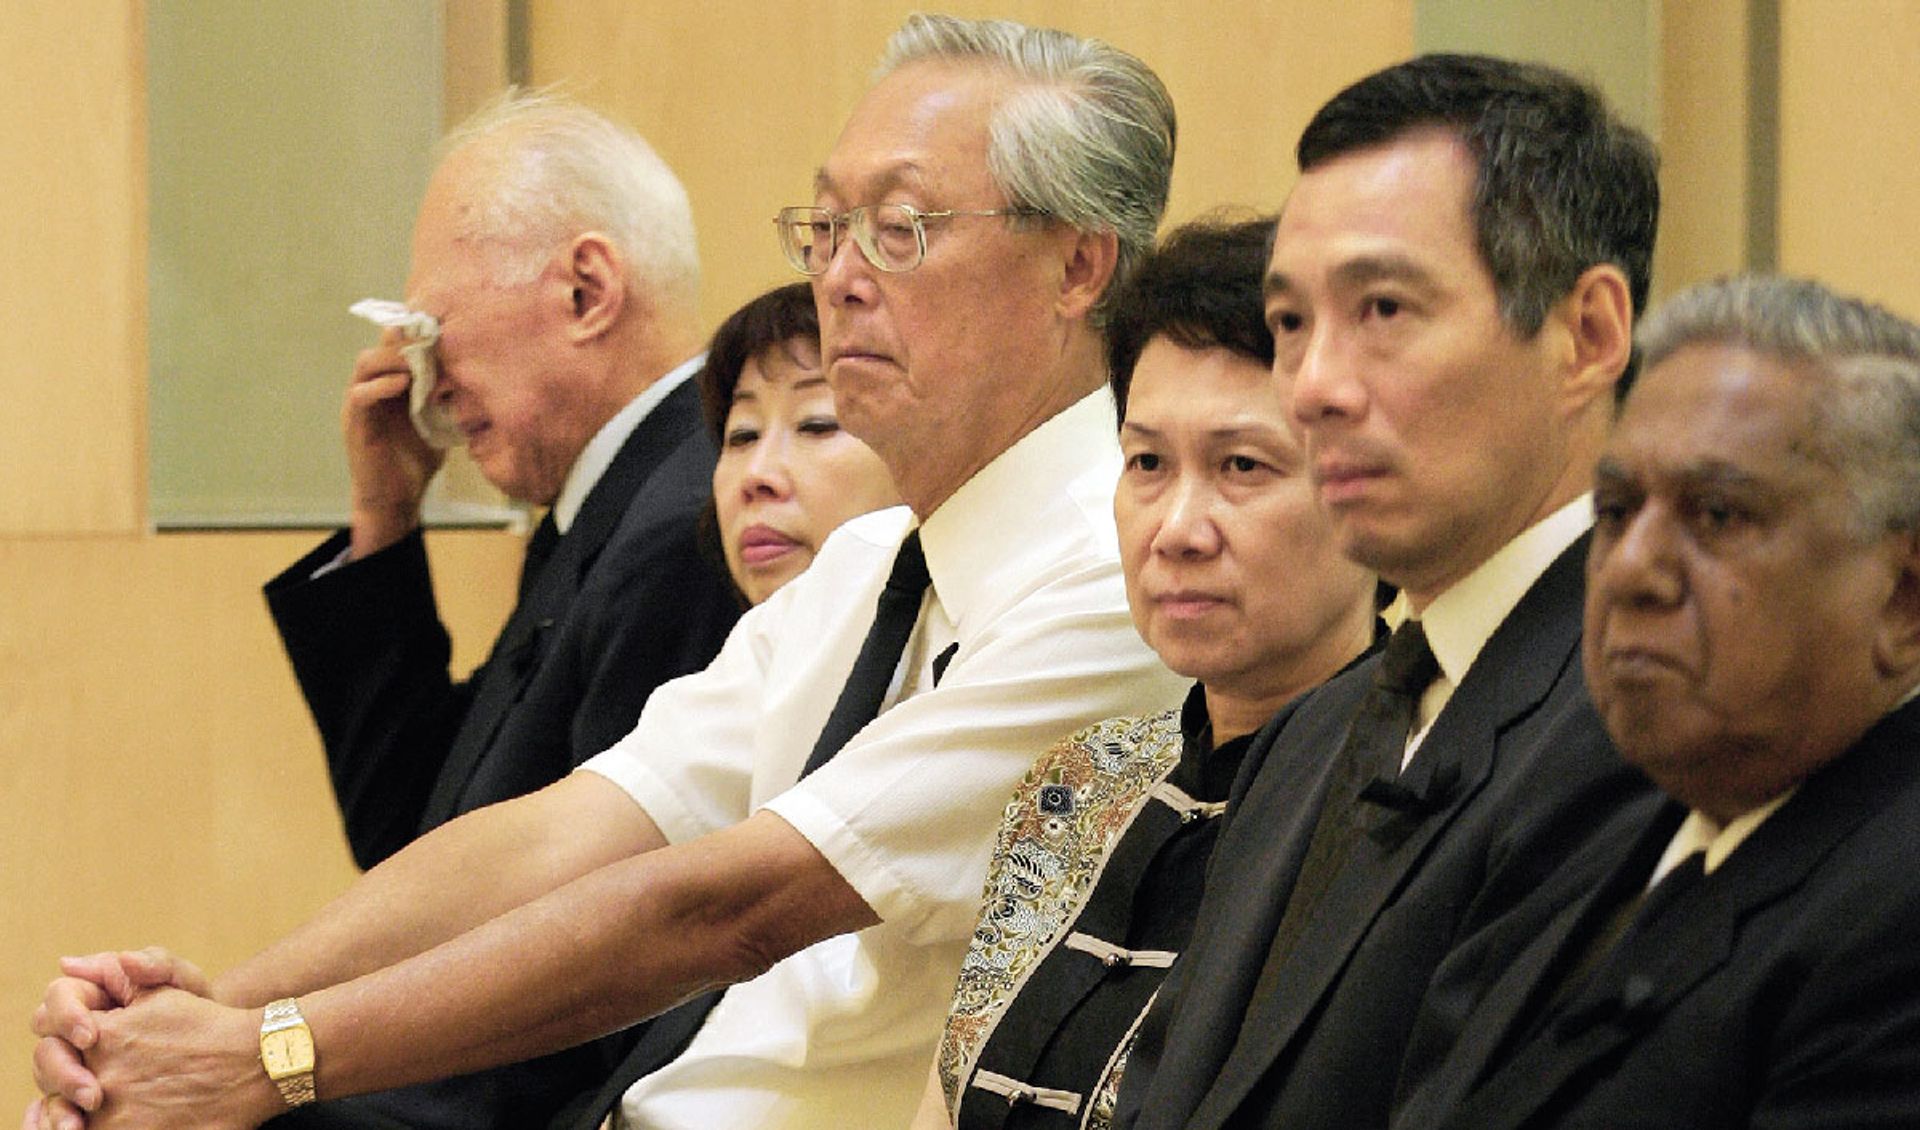 Mr Lee wiping away his tears at the funeral of former president Wee Kim Wee at Mandai Crematorium on May 6, 2005. With him is (from right) President S R Nathan, Prime Minister Lee Hsien Loong, Mrs Lee, Senior Minister Goh Chok Tong and Mrs Goh. Mr Wee, widely known as the People’s President, was the cousin of the elder Mr Lee’s mother. Photo: Dennis Thong/Lianhe Zaobao